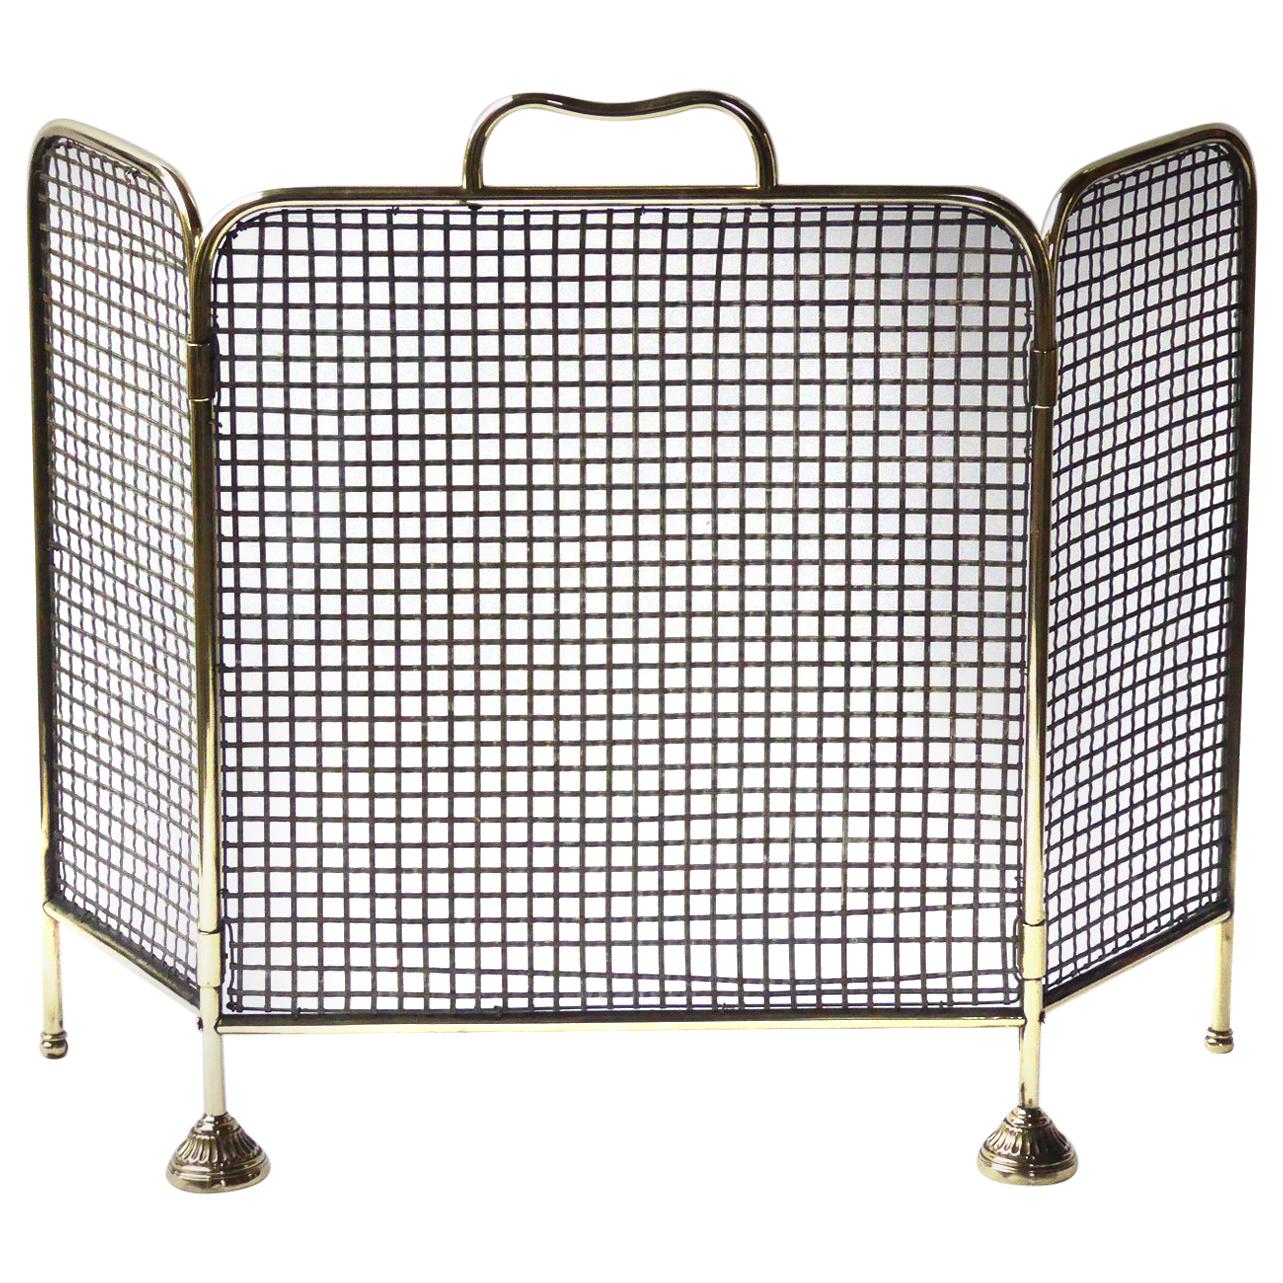 19th Century English Victorian Fireplace Screen or Fire Screen